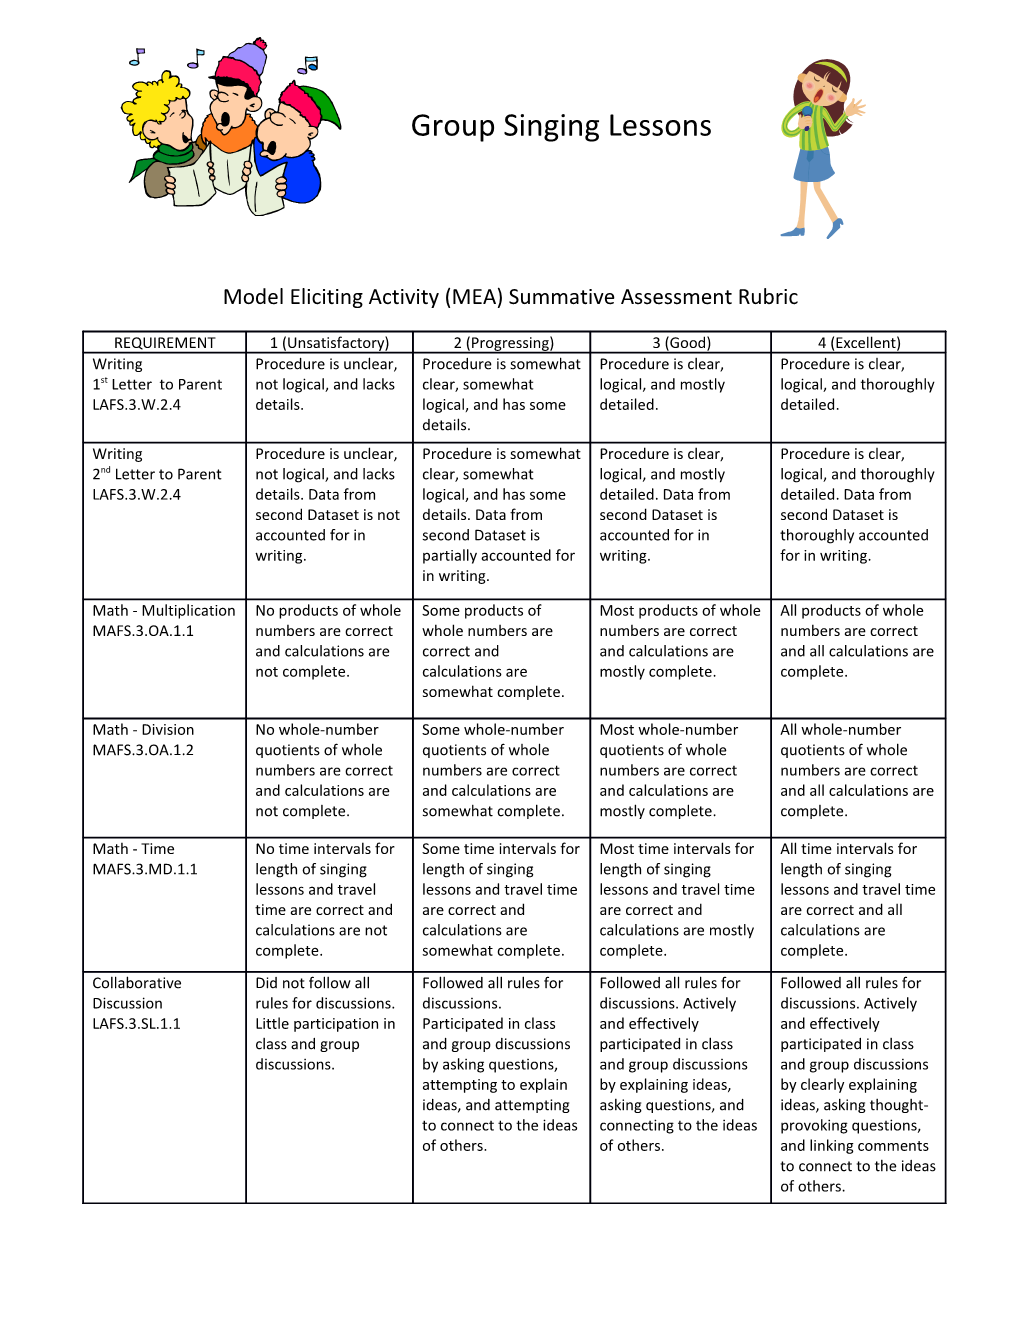 Model Eliciting Activity (MEA) Summative Assessment Rubric